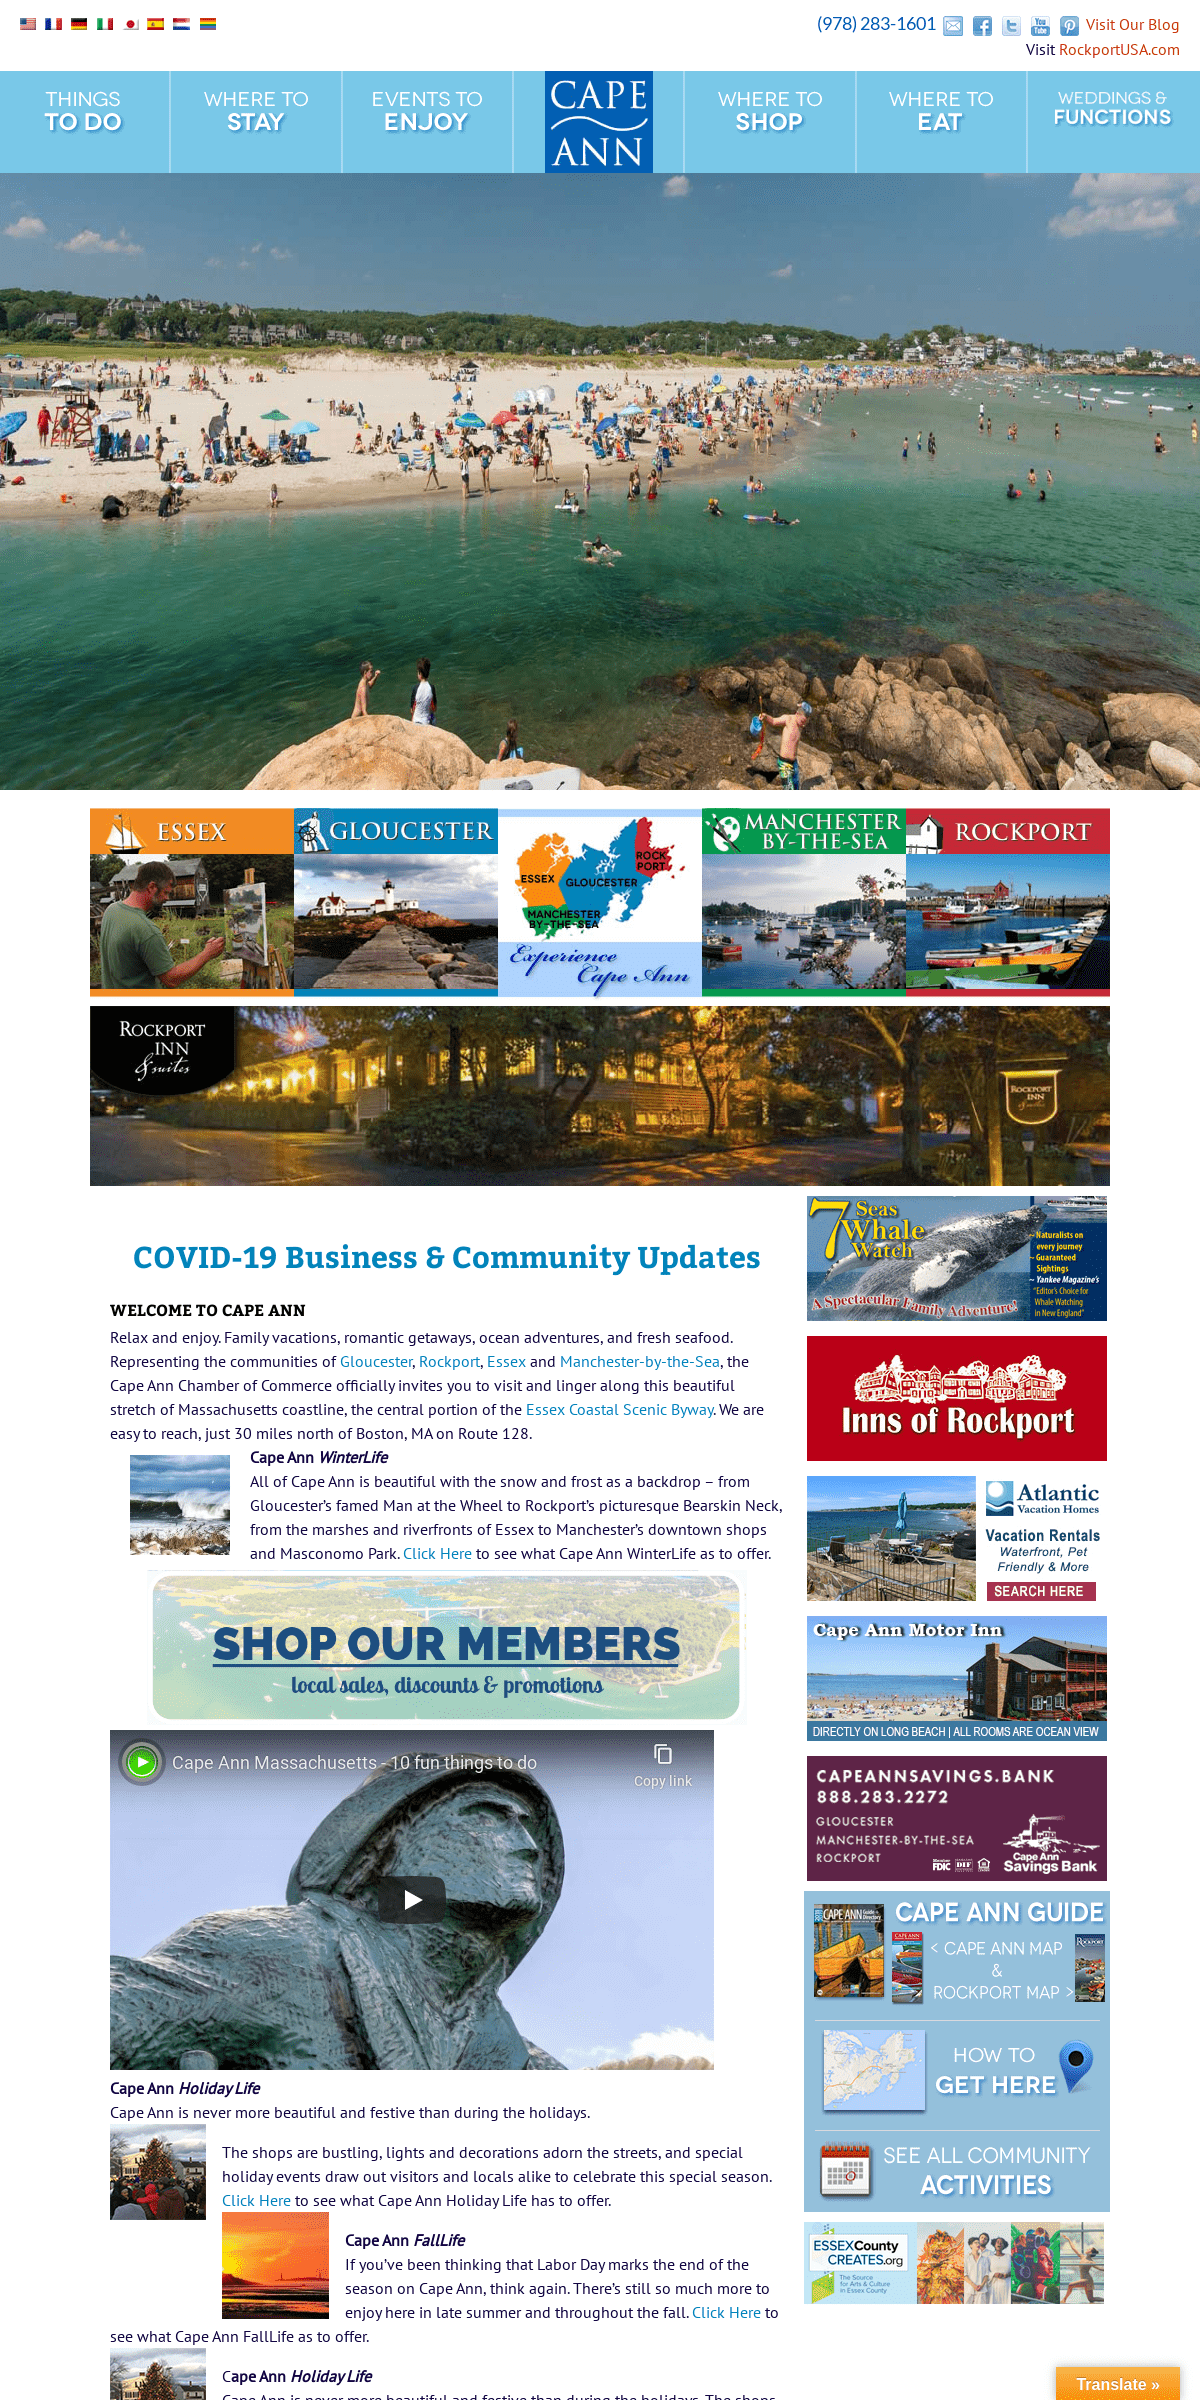 A complete backup of capeannvacations.com